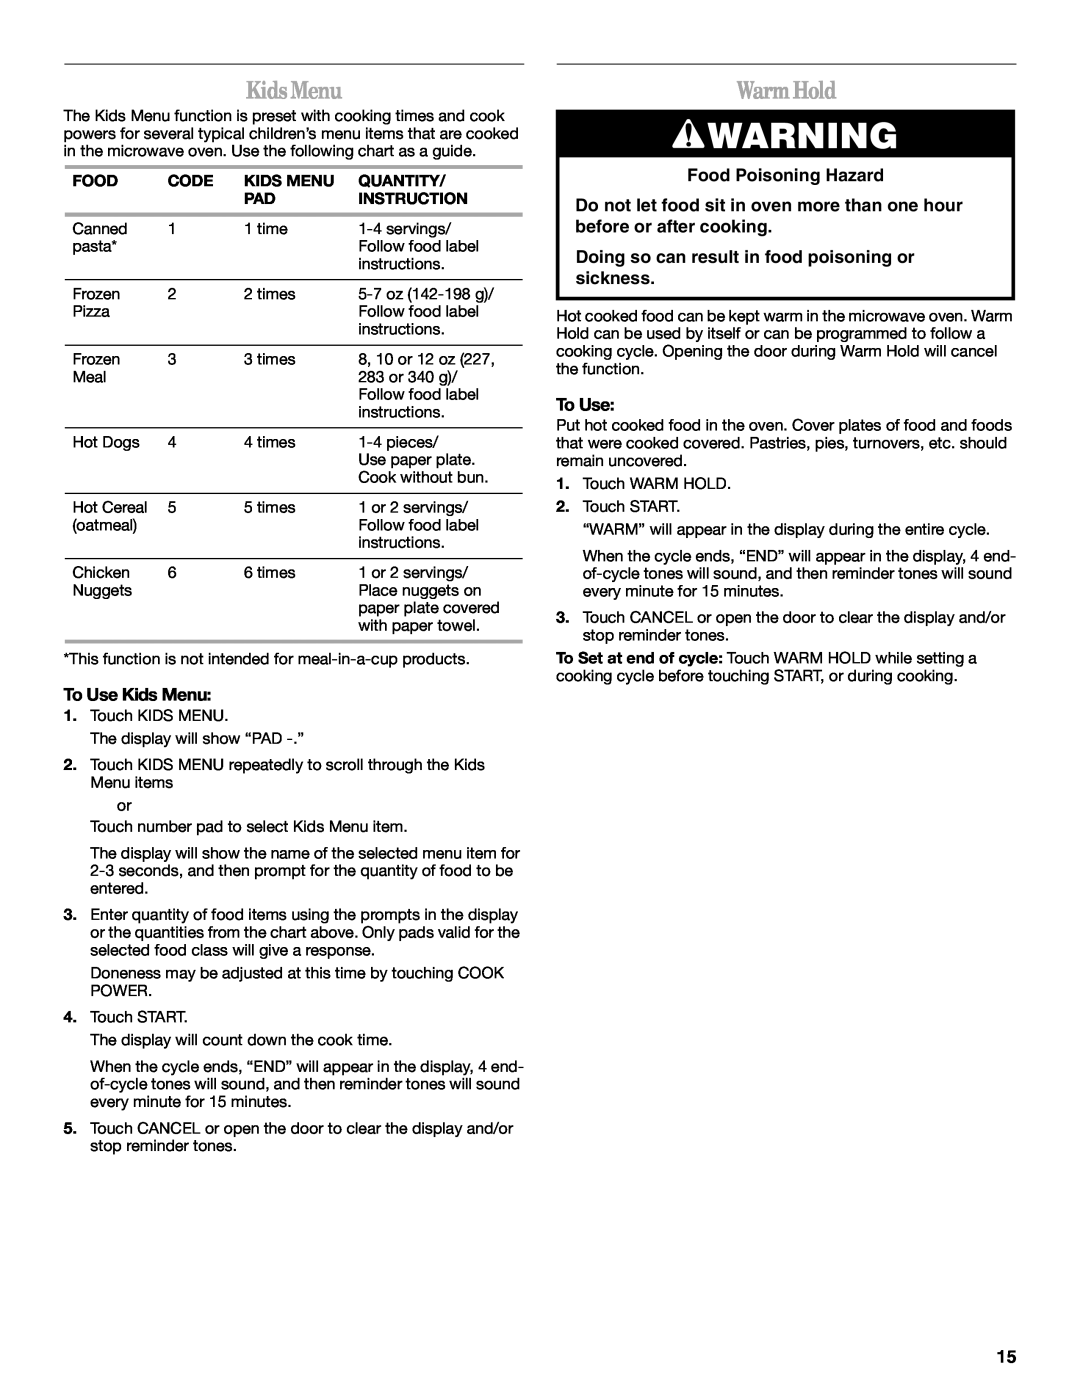 Whirlpool GH5184XP Kids Menu, Warm Hold, Food Poisoning Hazard, Doing so can result in food poisoning or sickness, Code 